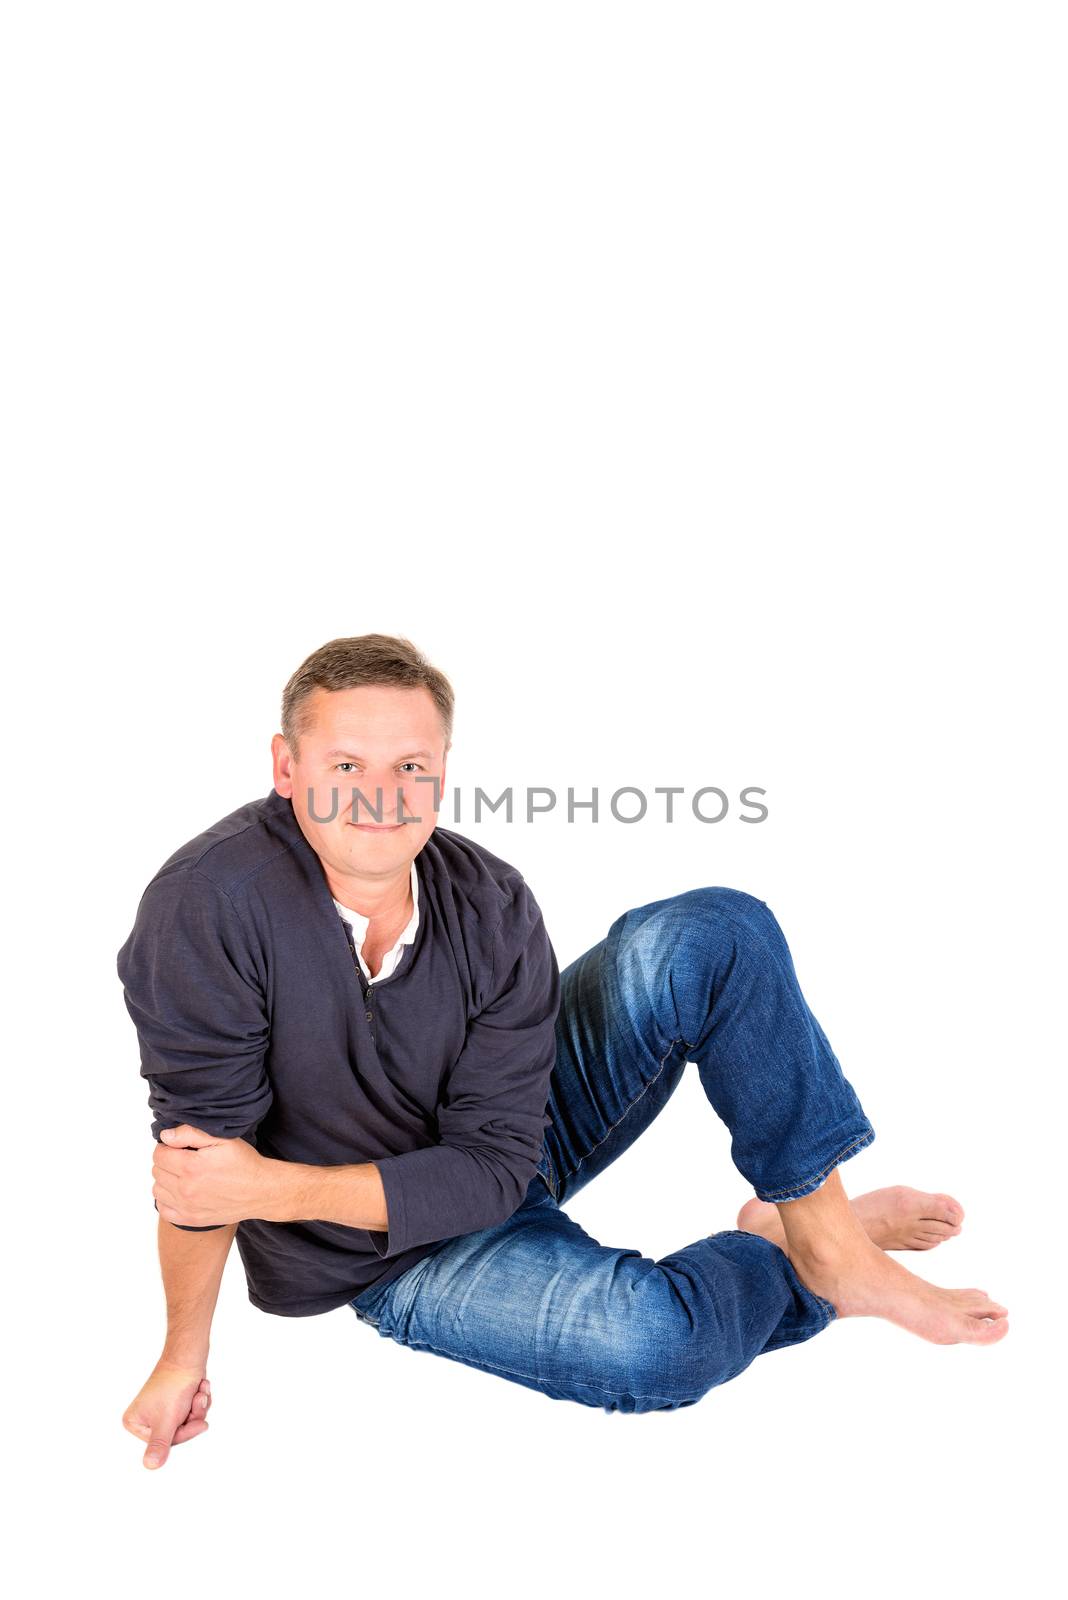 Casually dressed middle aged man smiling. Sitting on a floor barefoot man shot in vertical format isolated on white.